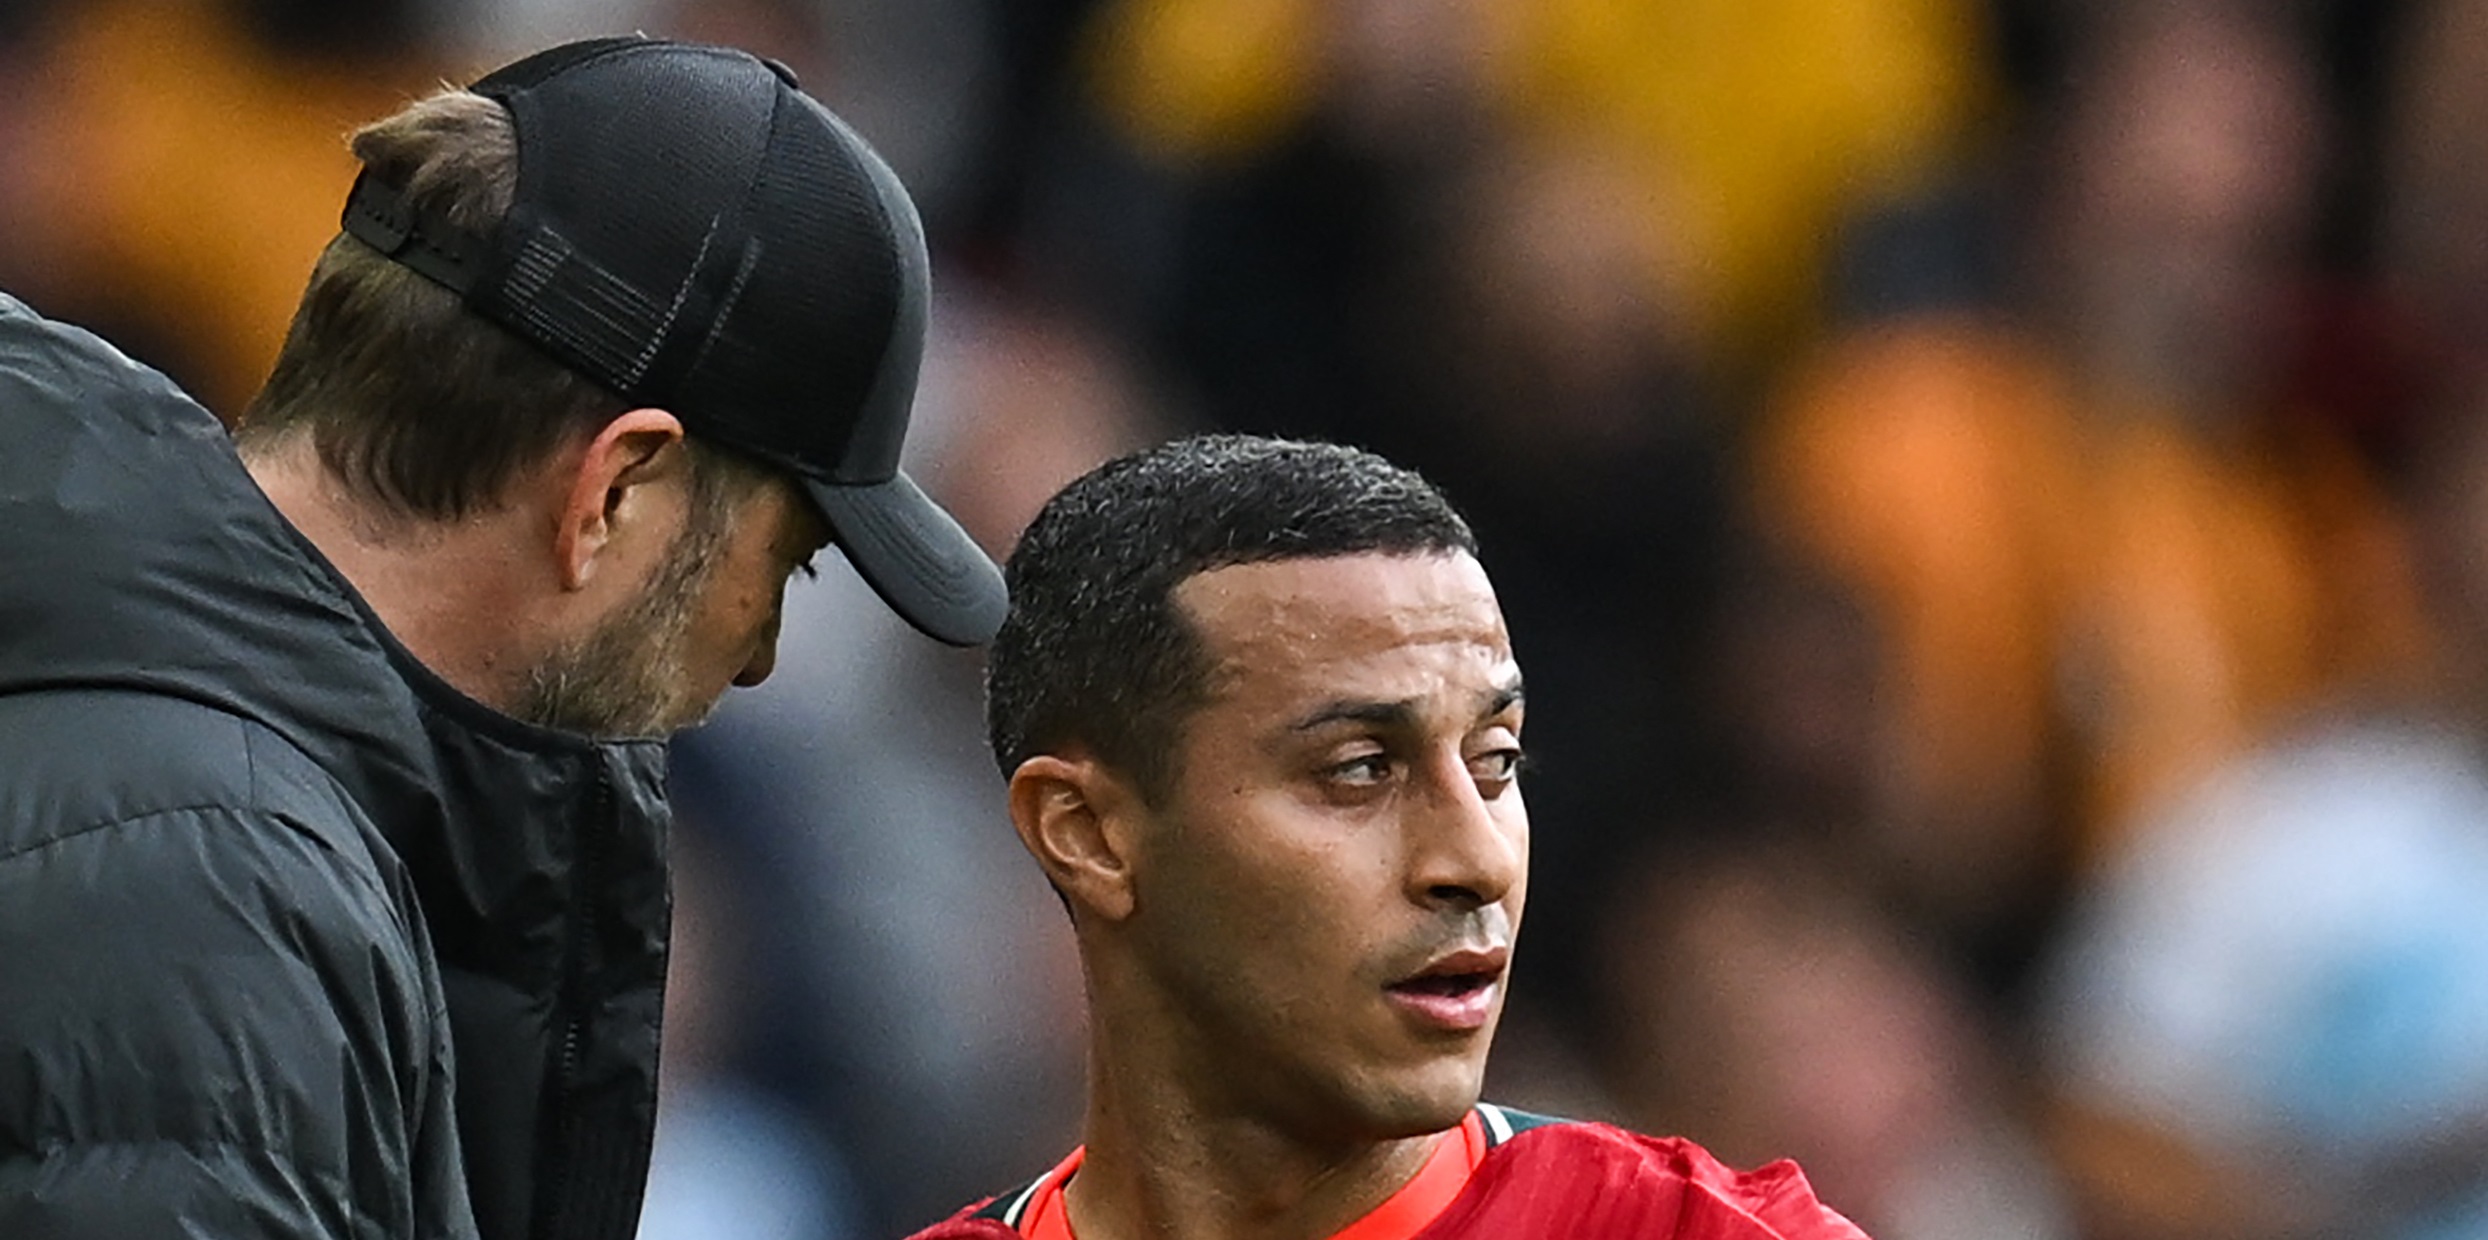 ‘Not good’ – Klopp issues update on Thiago Alcantara’s injury in hammer blow ahead of Champions League final